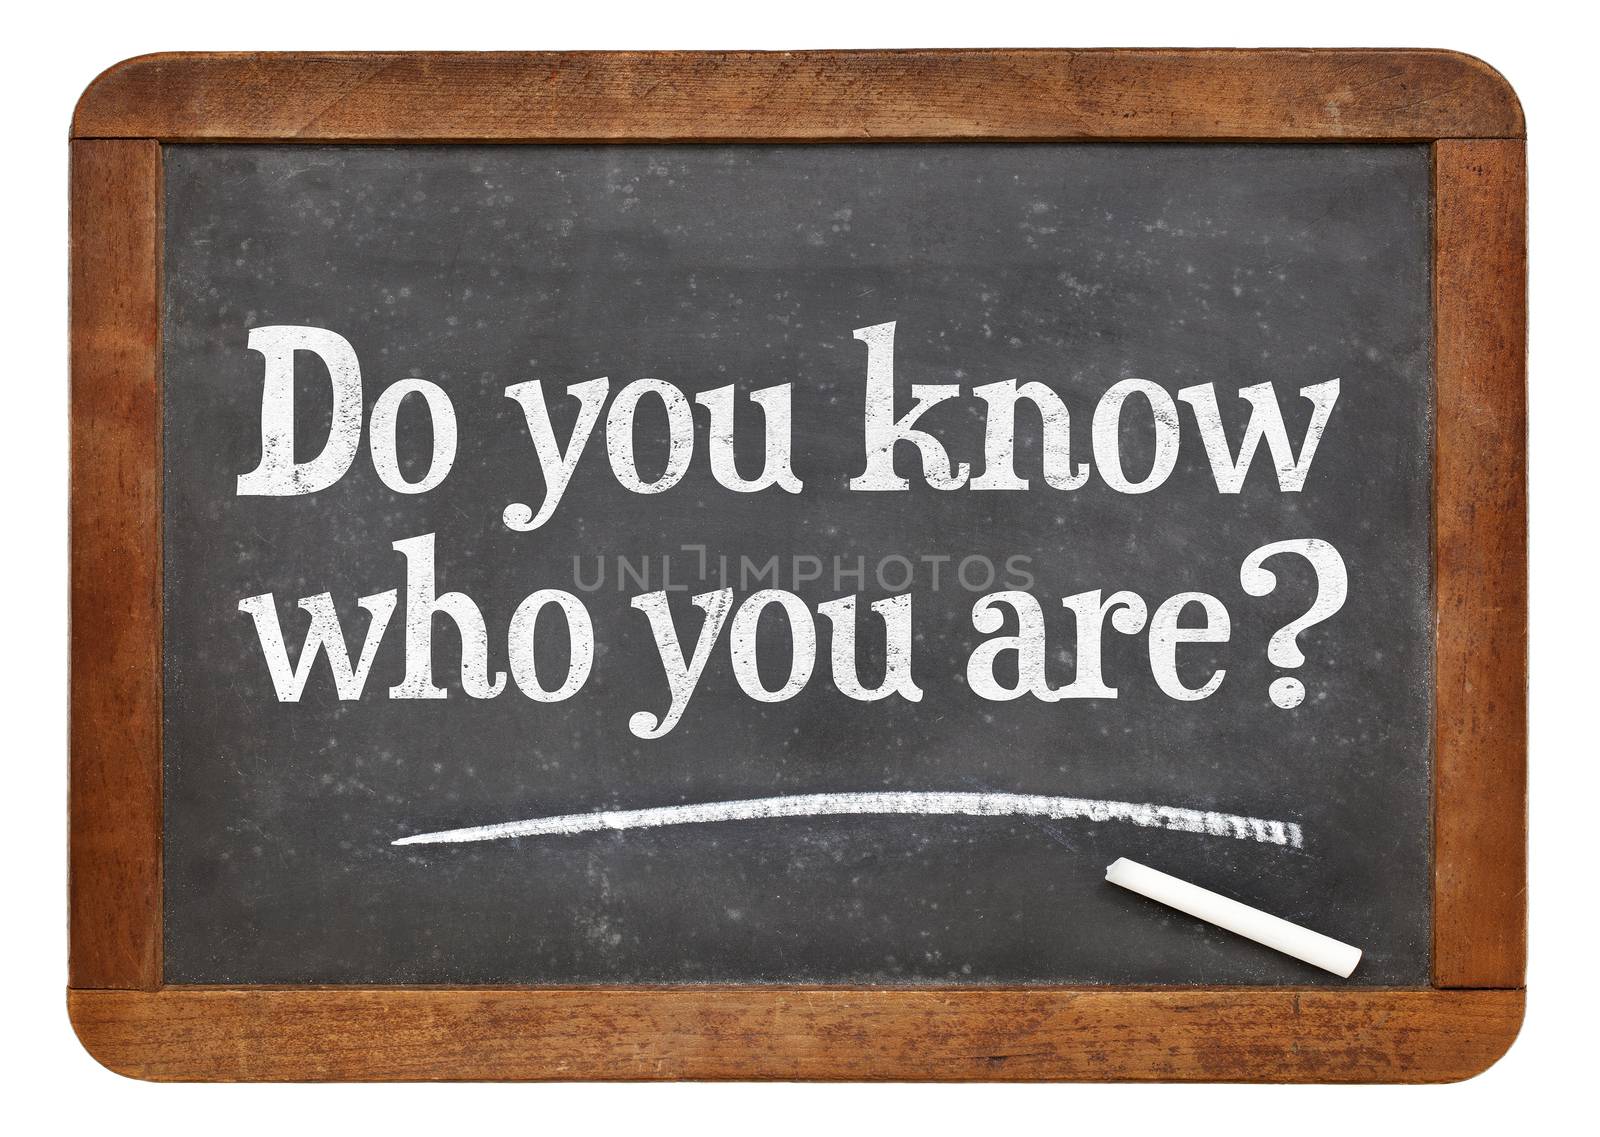 Do you know who you are ? A question on a vintage slate blackboard